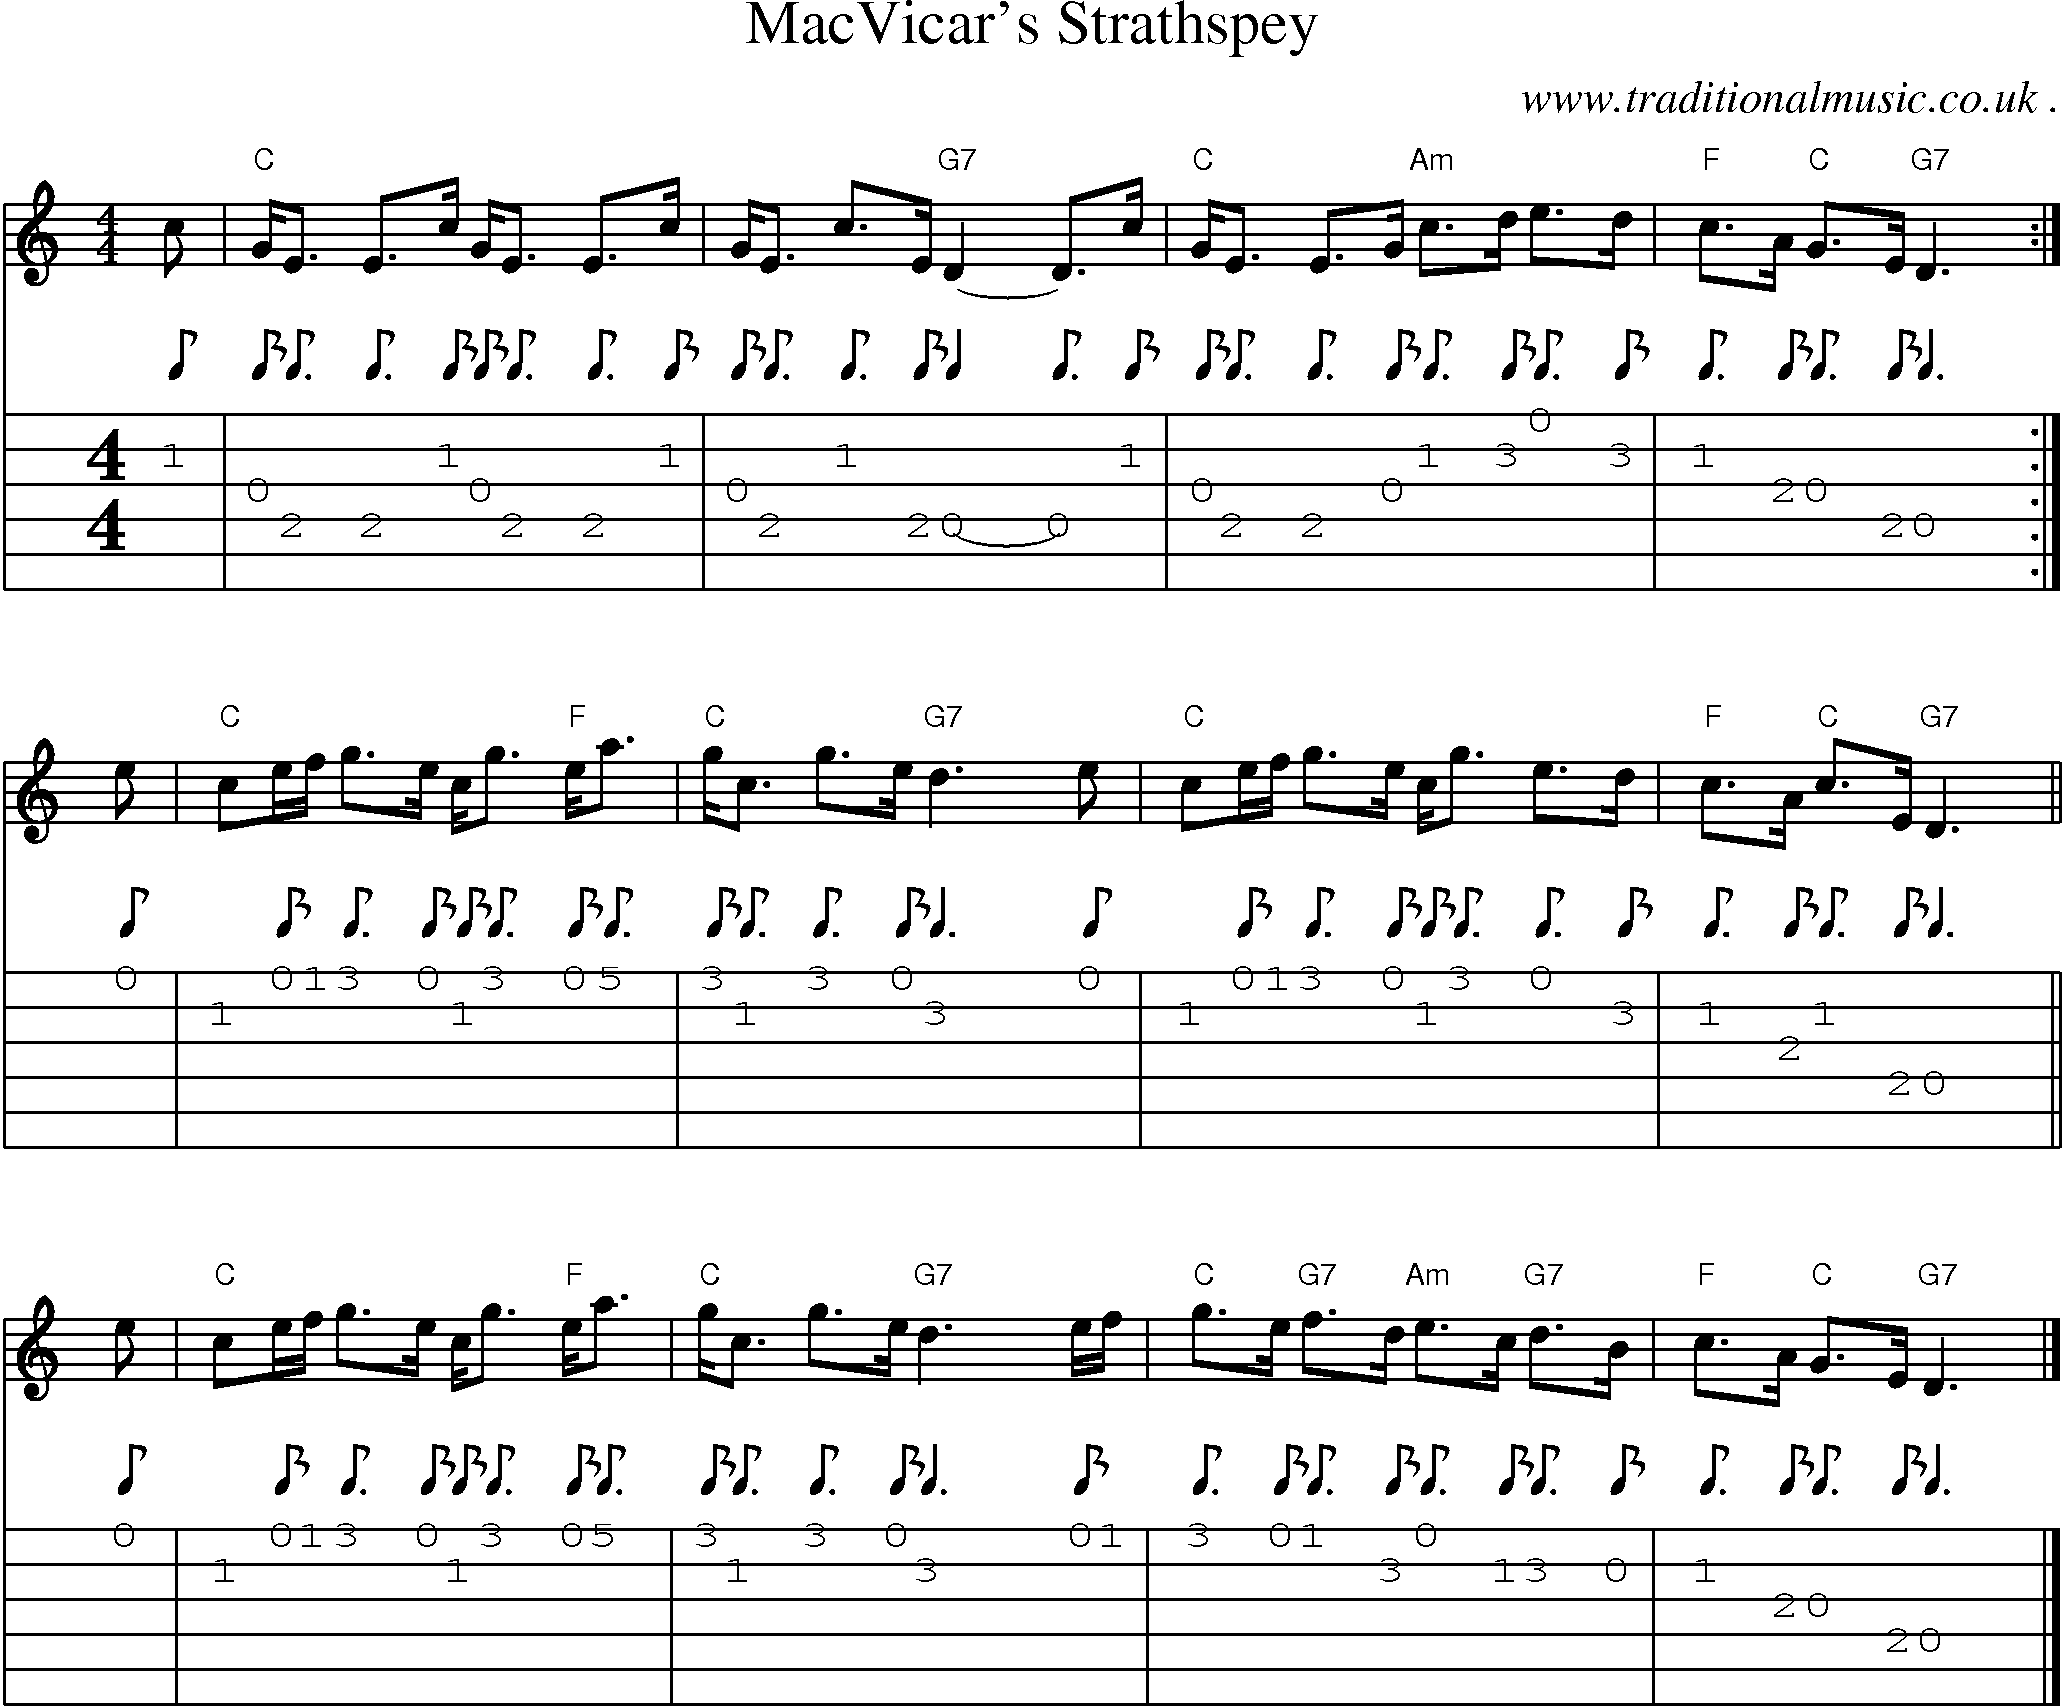 Sheet-music  score, Chords and Guitar Tabs for Macvicars Strathspey